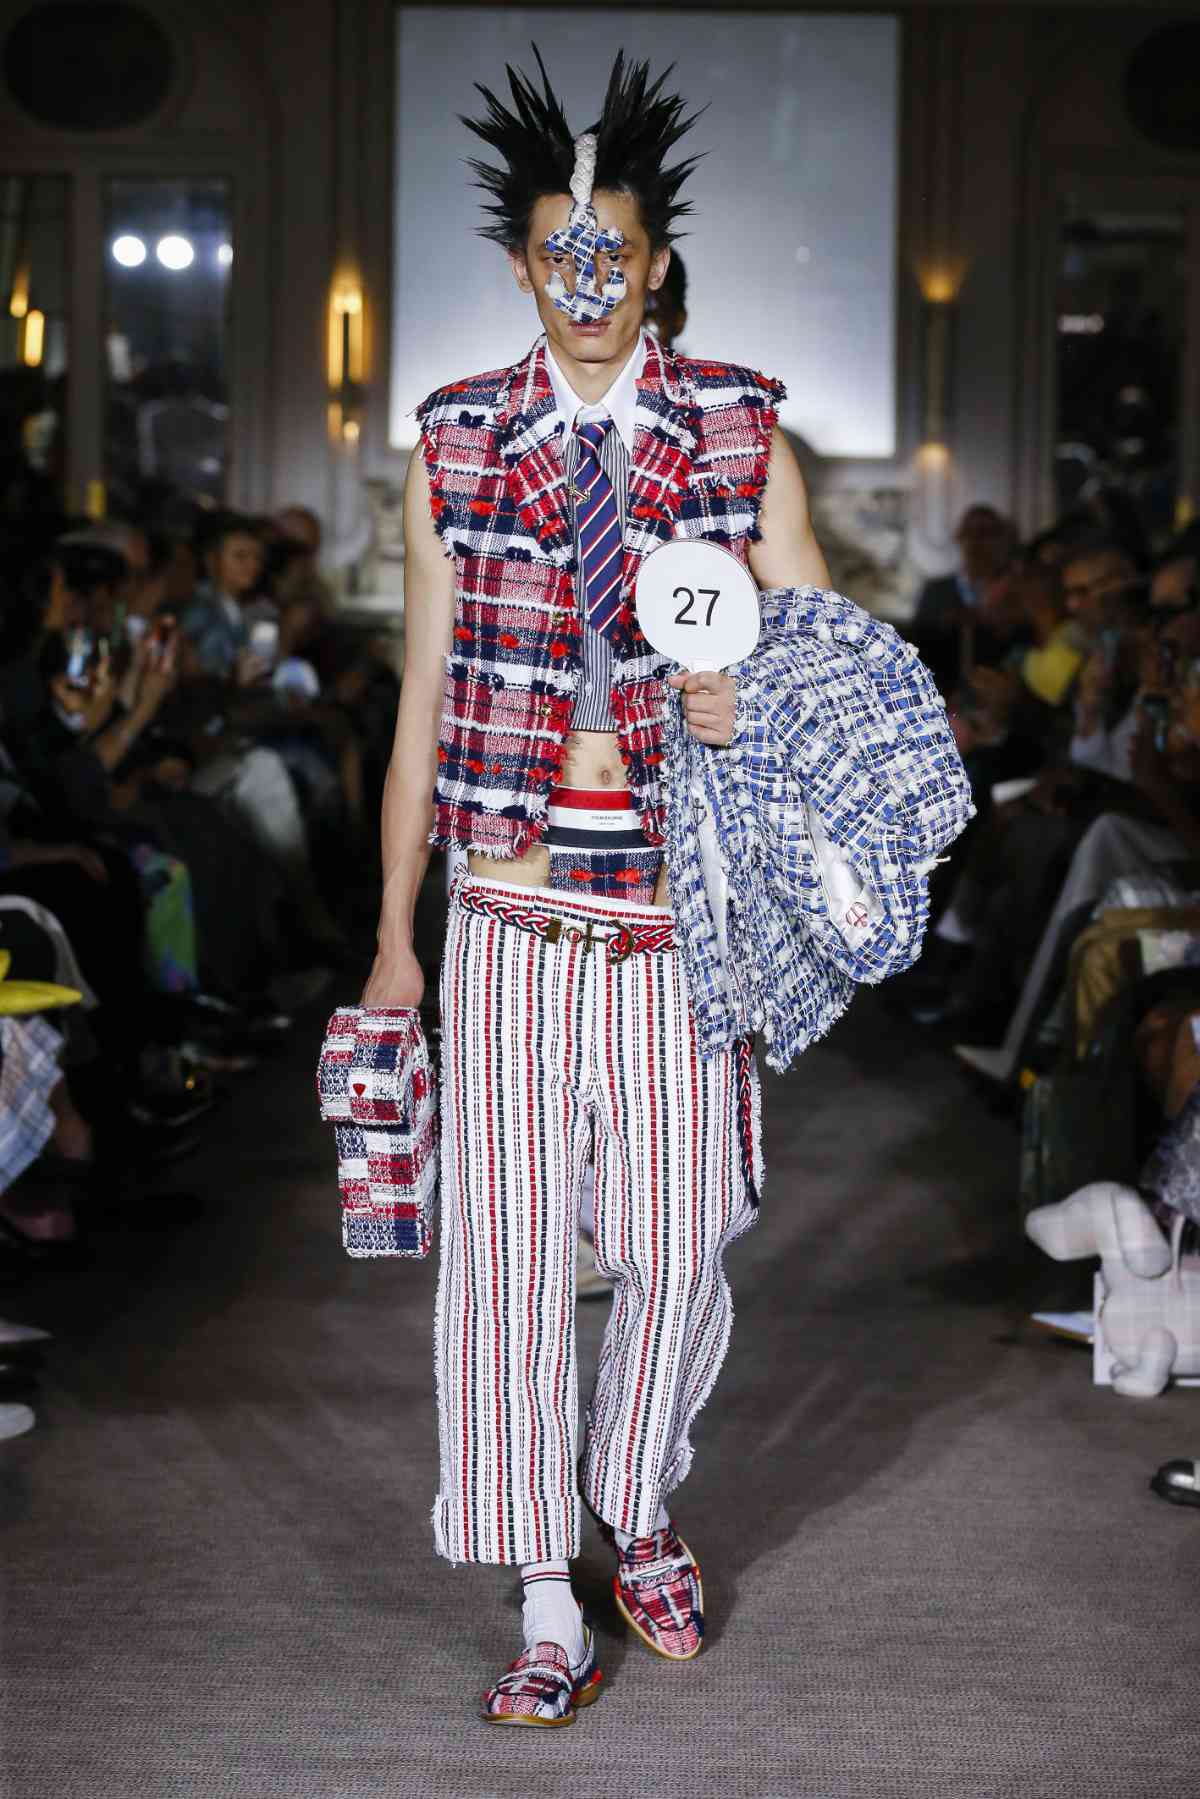 Thom Browne Presents Its New Spring 2023 Men's Collection